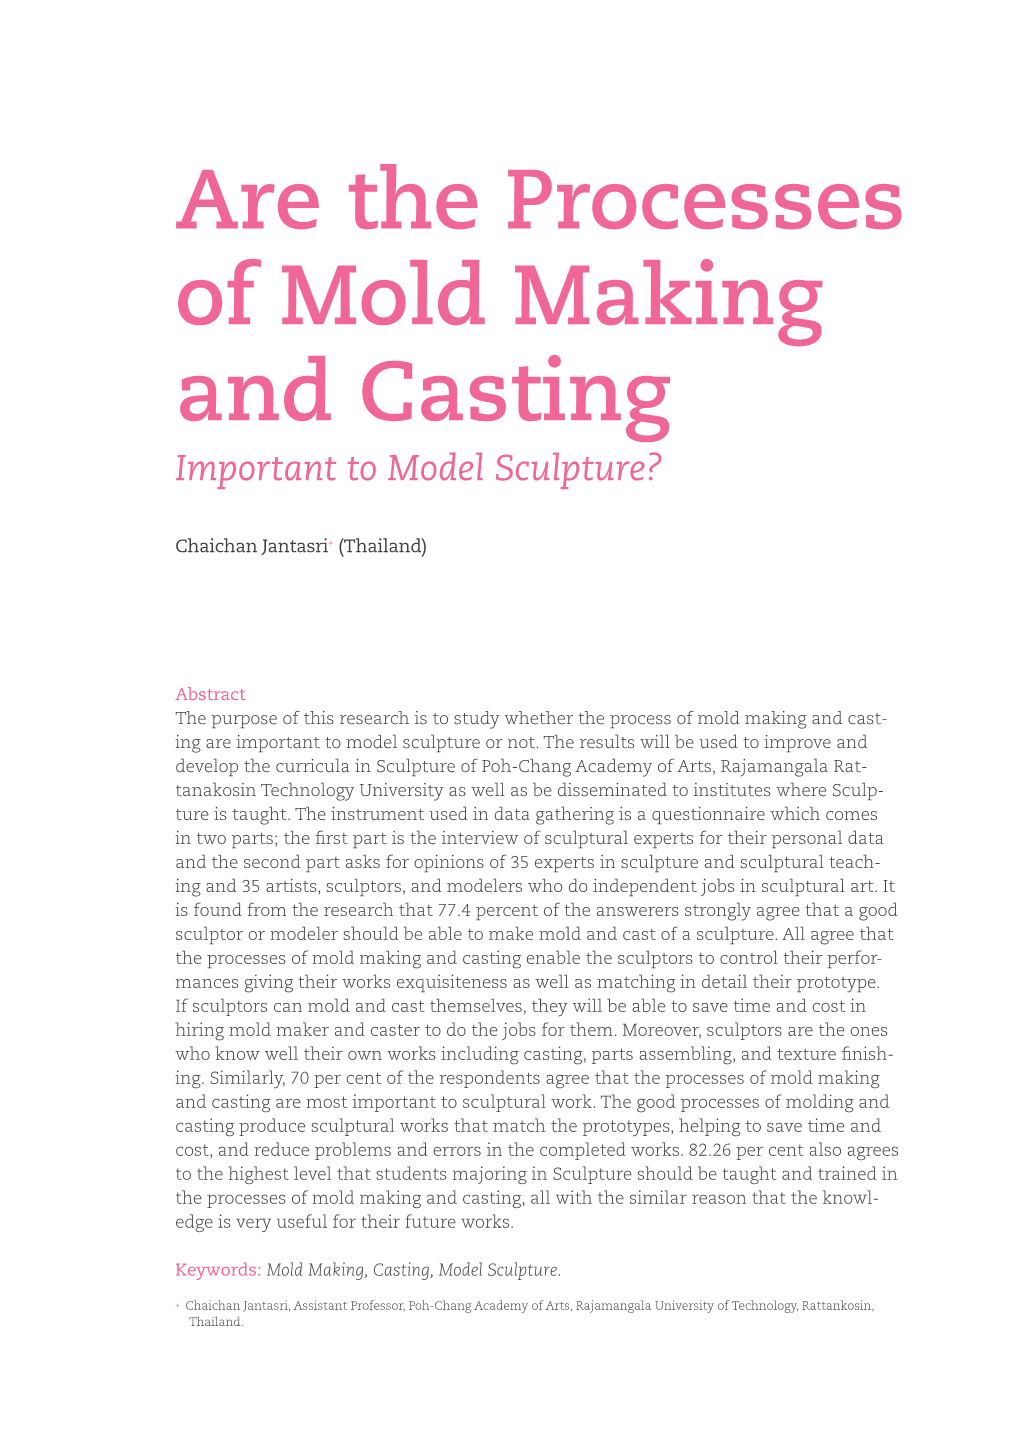 Are the Processes of Mold Making and Casting Important to Model Sculpture?